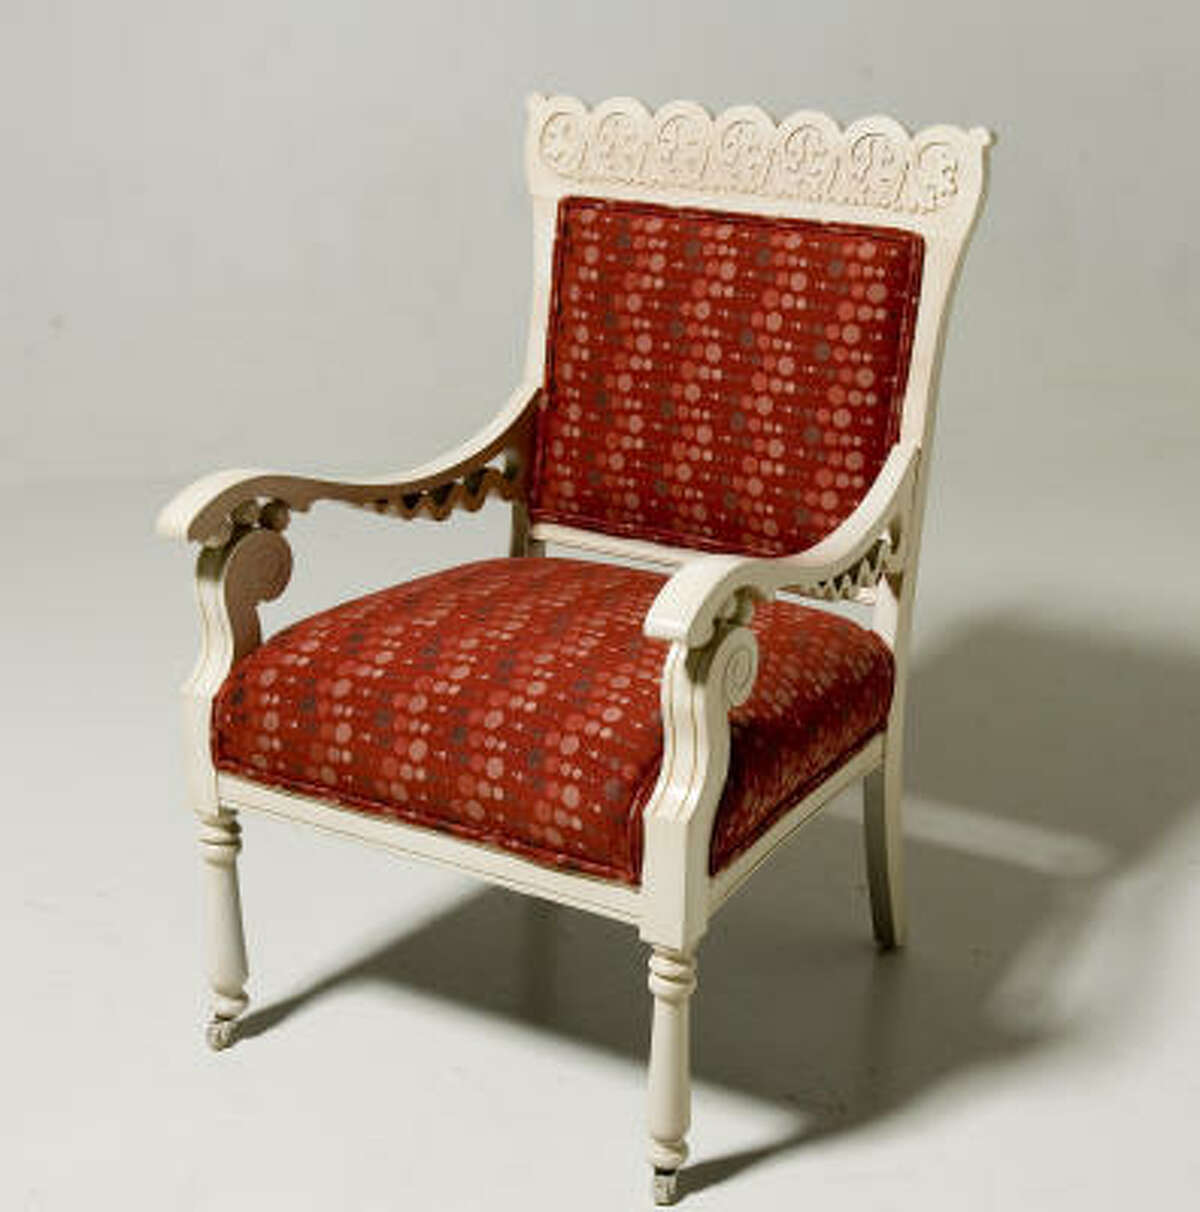 It cost $53 for fabric from High Fashion Home and $410 to have I & J Custom paint and reupholster the chair.